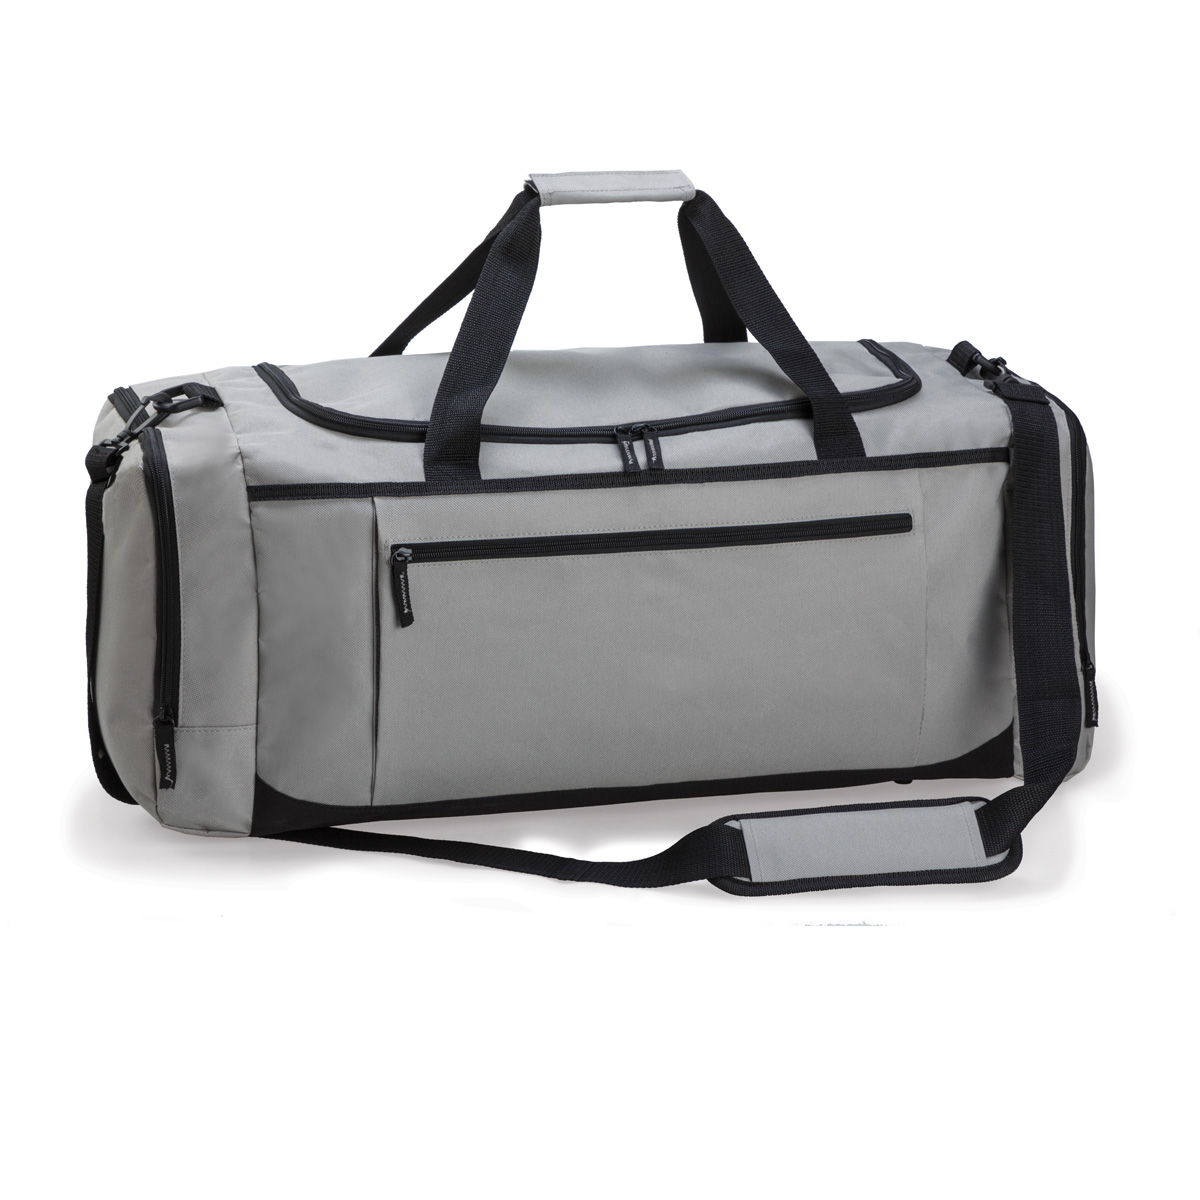 Lexicon Sports Tog  Bag Product Image